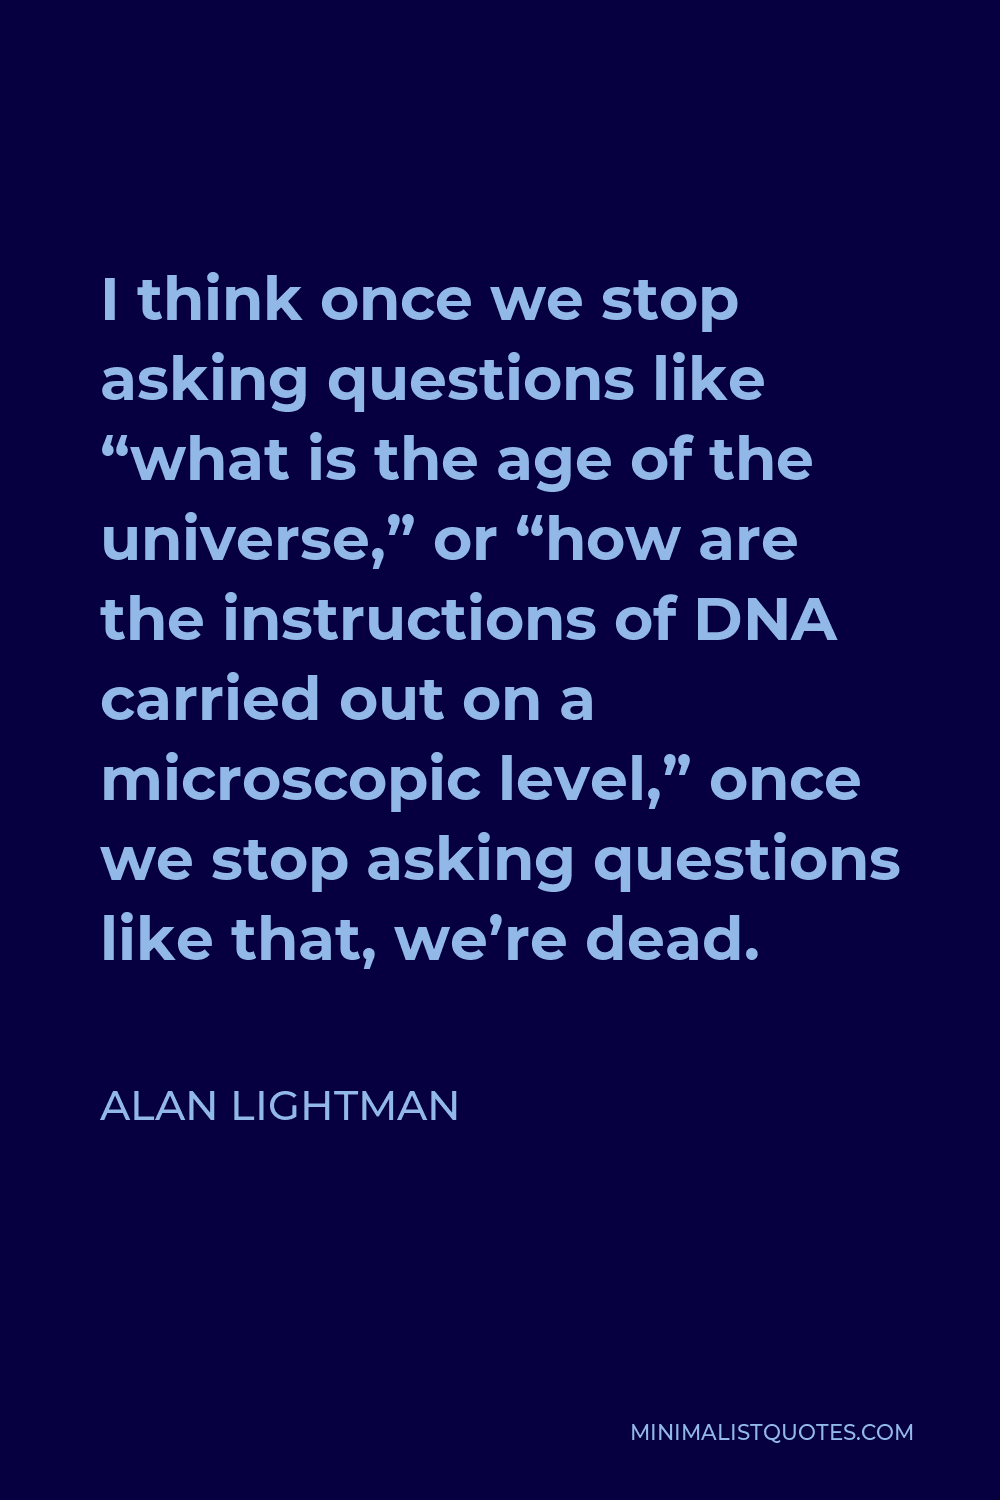 Alan Lightman Quote - I think once we stop asking questions like “what is the age of the universe,” or “how are the instructions of DNA carried out on a microscopic level,” once we stop asking questions like that, we’re dead.